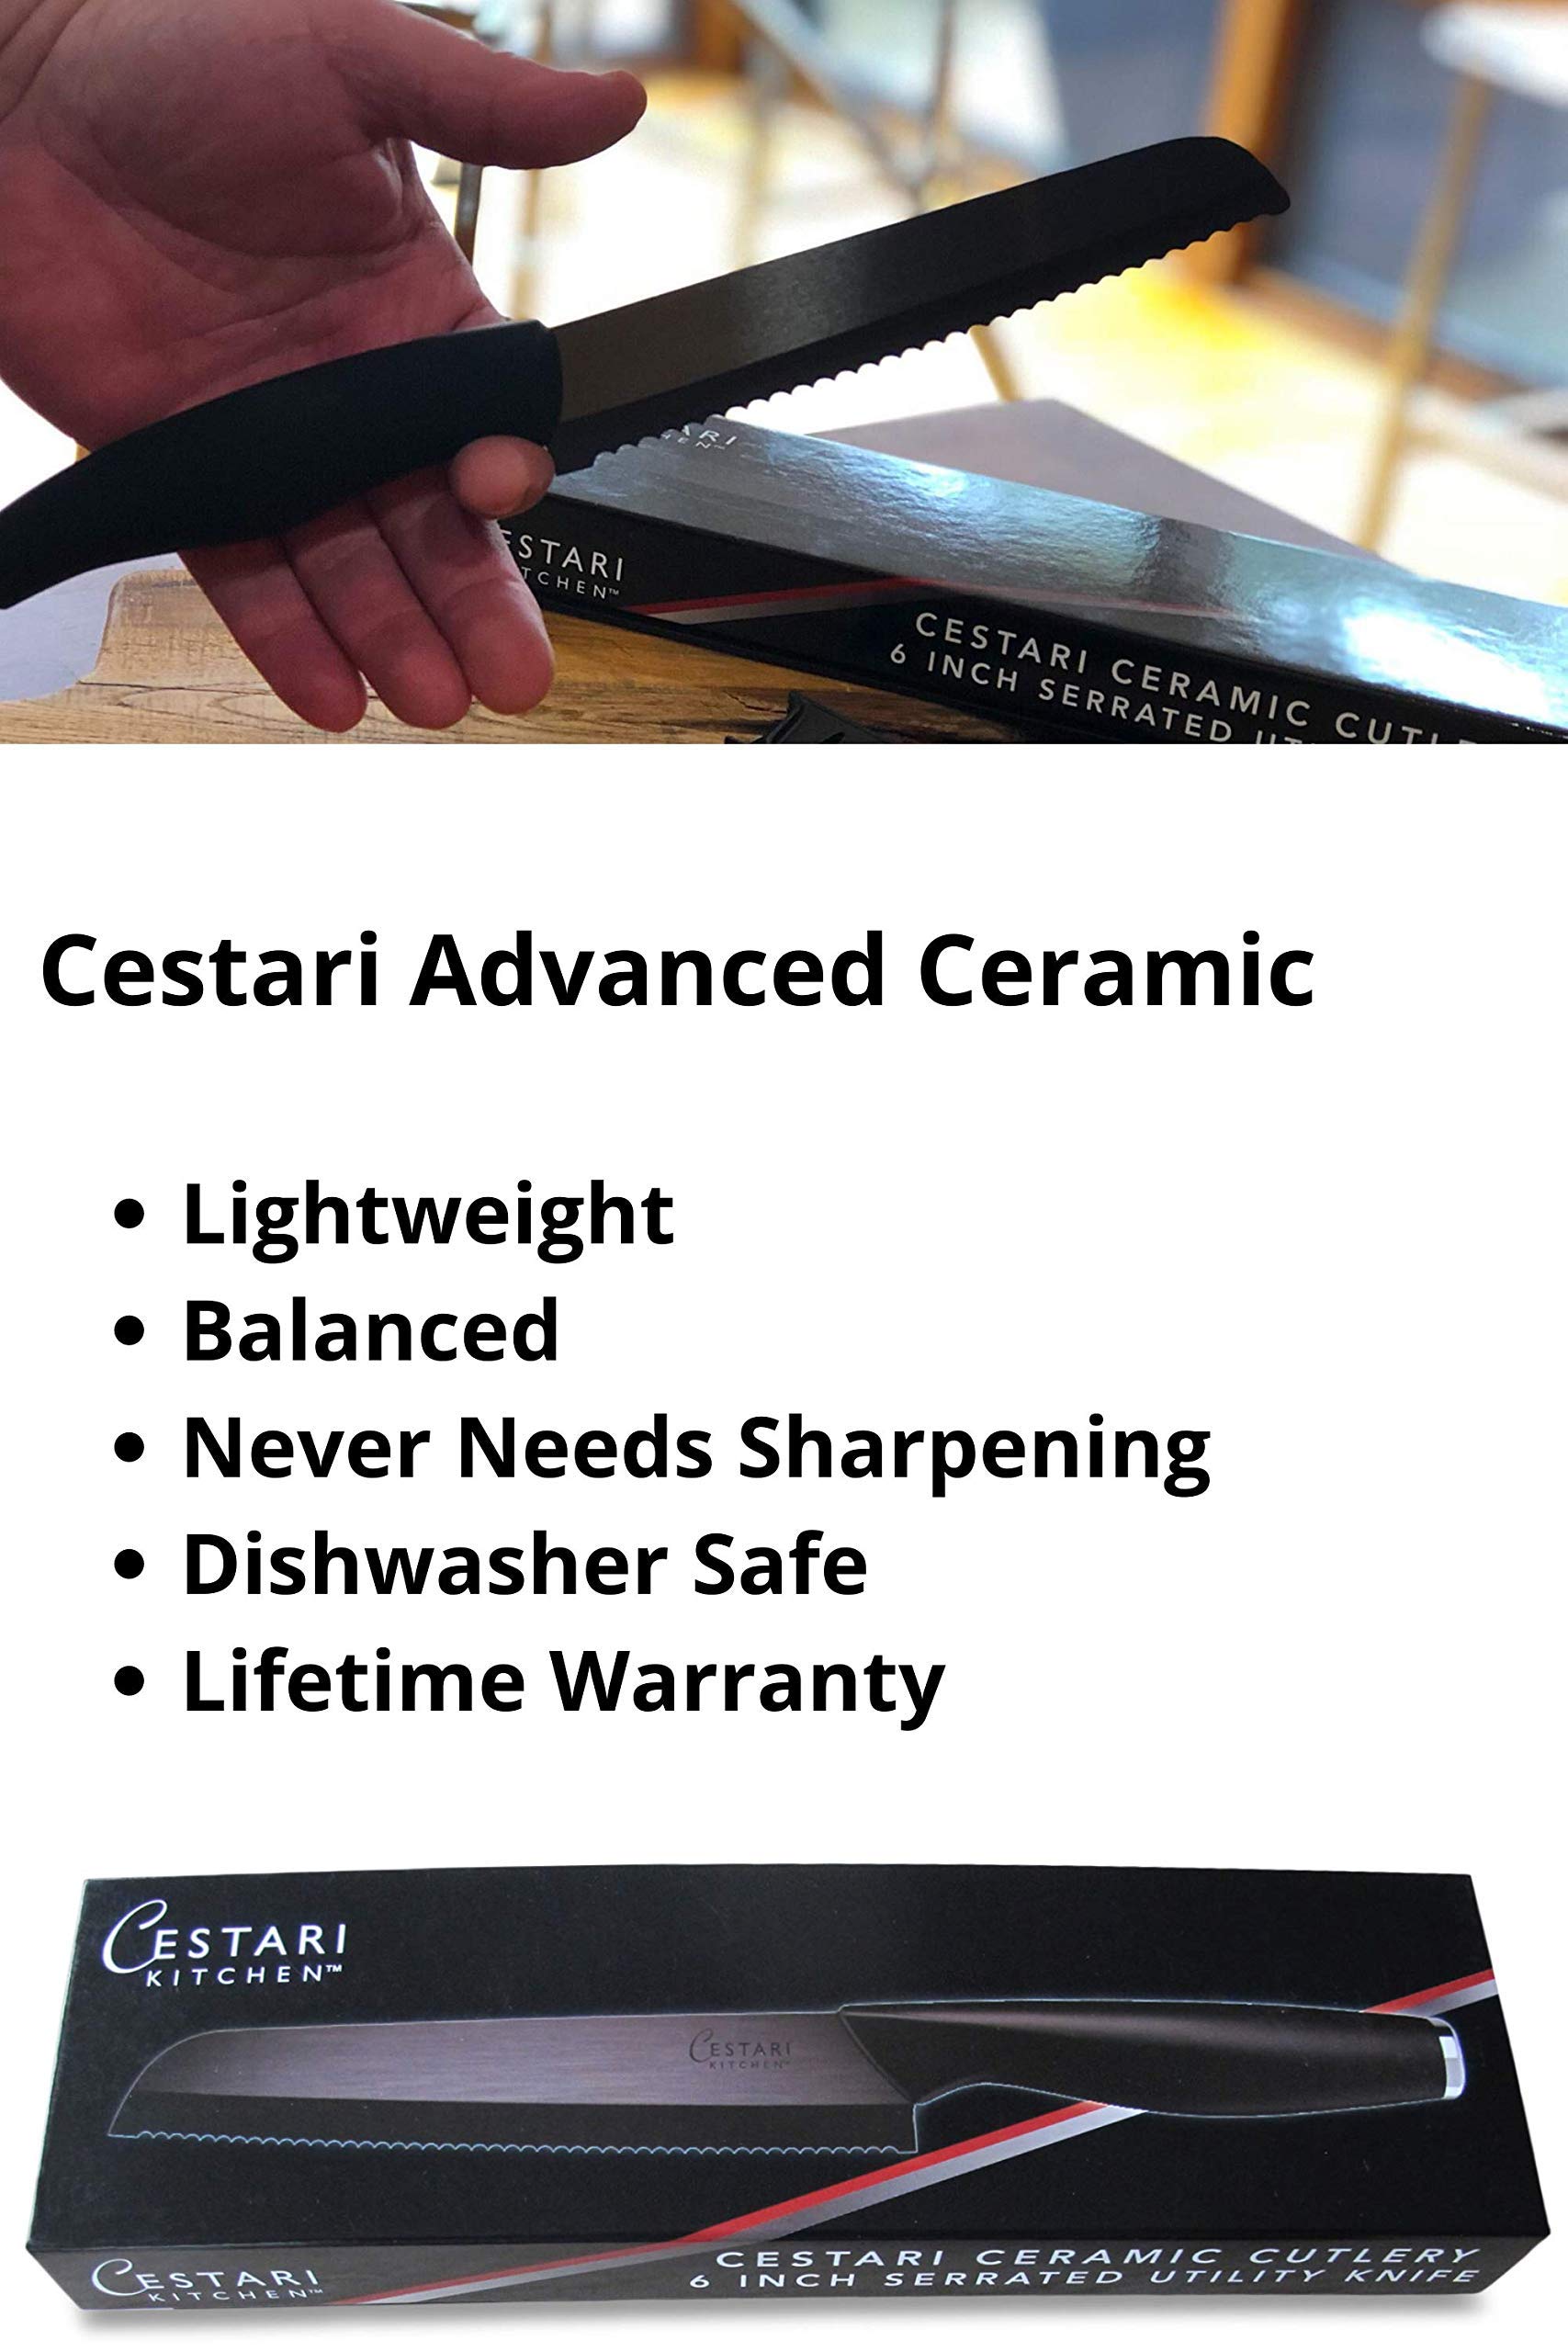 Cestari Serrated Ceramic Knife Set of 2 Knives and Peeler: includes 6 inch Tomato Knife, 8 inch Bread Knife, and Straight Edge Ceramic Vegetable Peeler